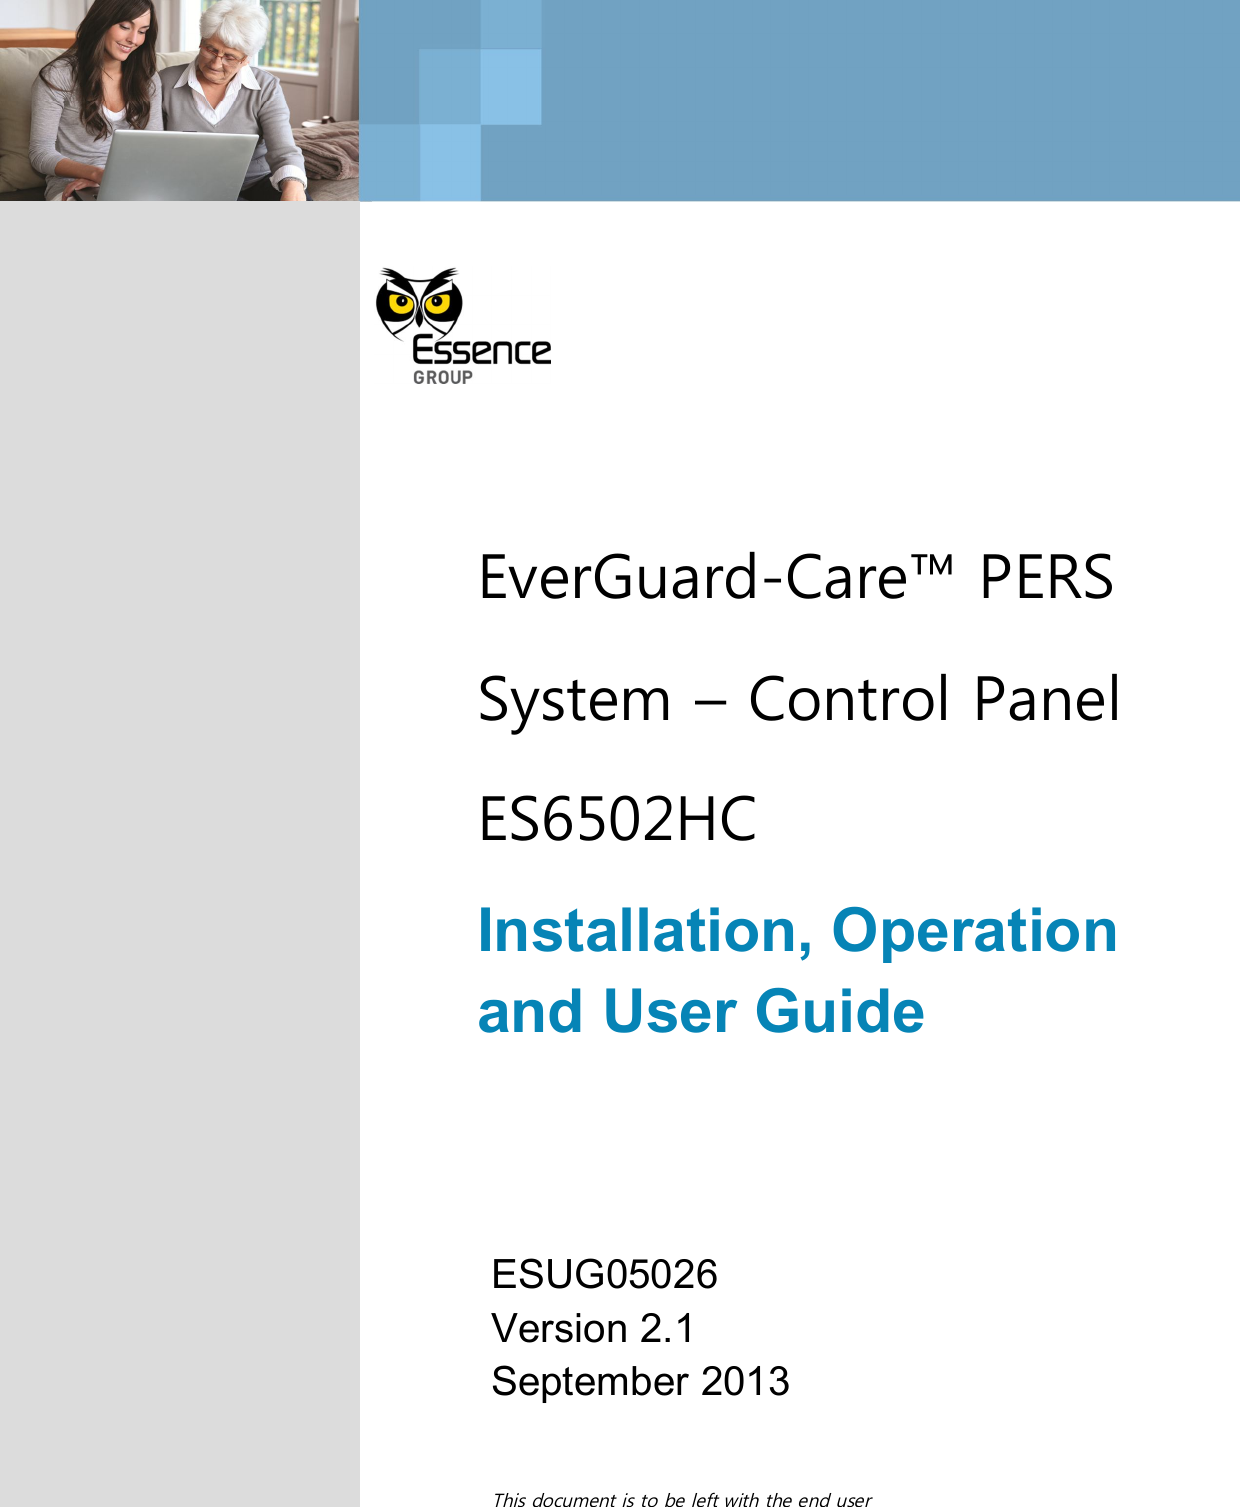      EverGuard-Care™ PERS System – Control Panel ES6502HC  Installation, Operation and User Guide    ESUG05026 Version 2.1 September 2013  This document is to be left with the end user